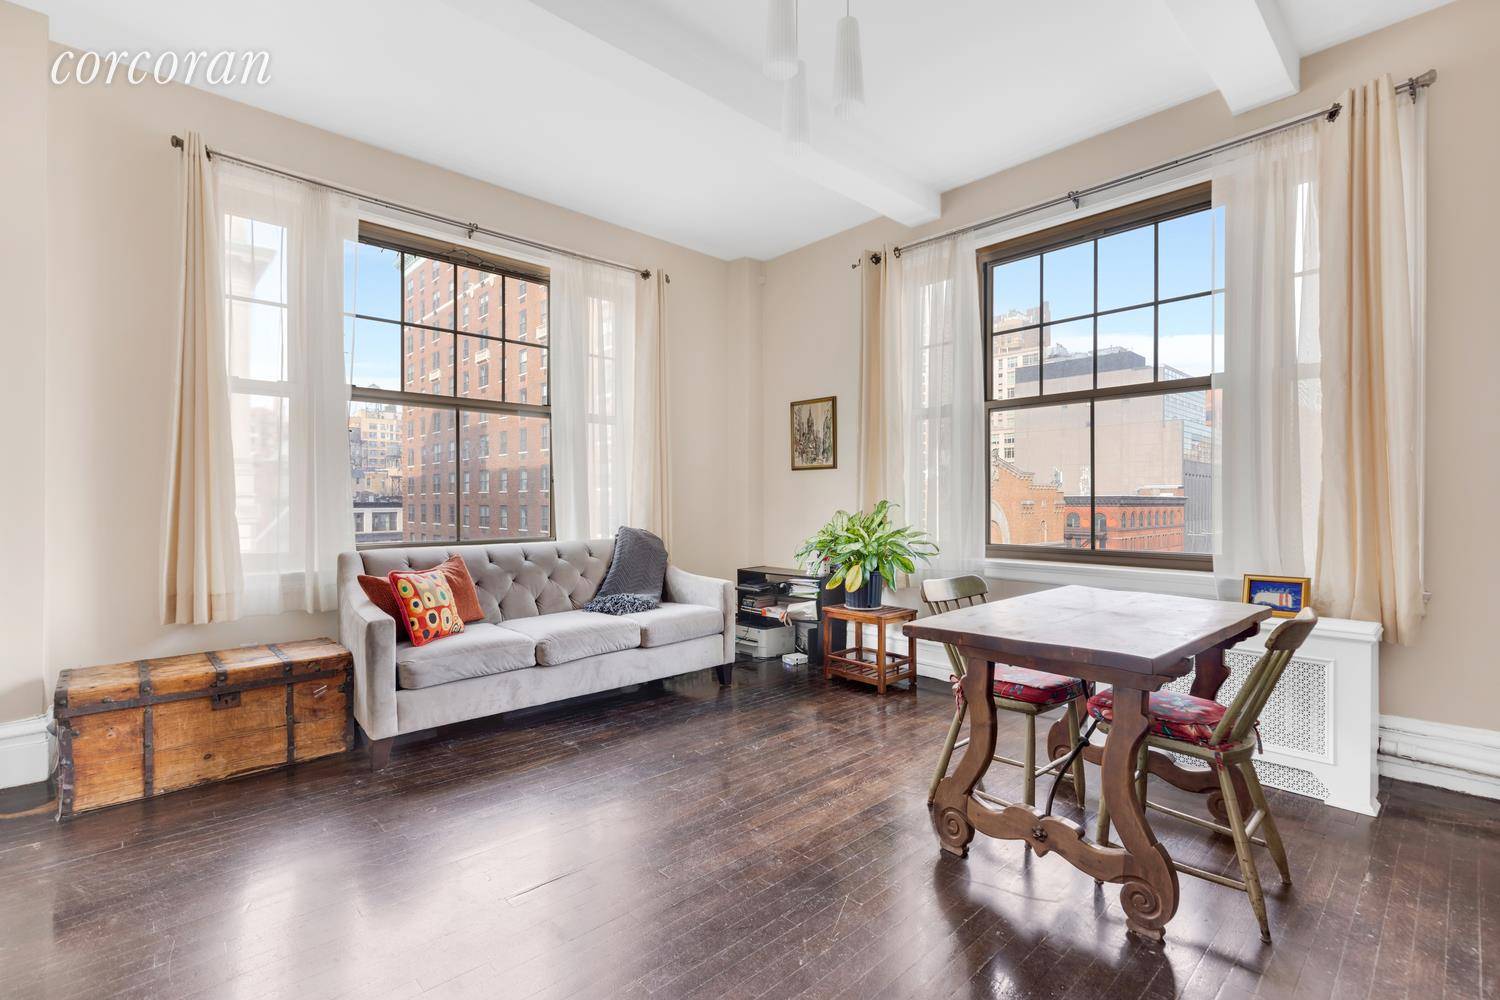 Apartment 706 at The Berkley, 170 West 74th Street, is a spacious corner one bedroom home with high ceilings, oversized windows, and an abundance of light and charm.